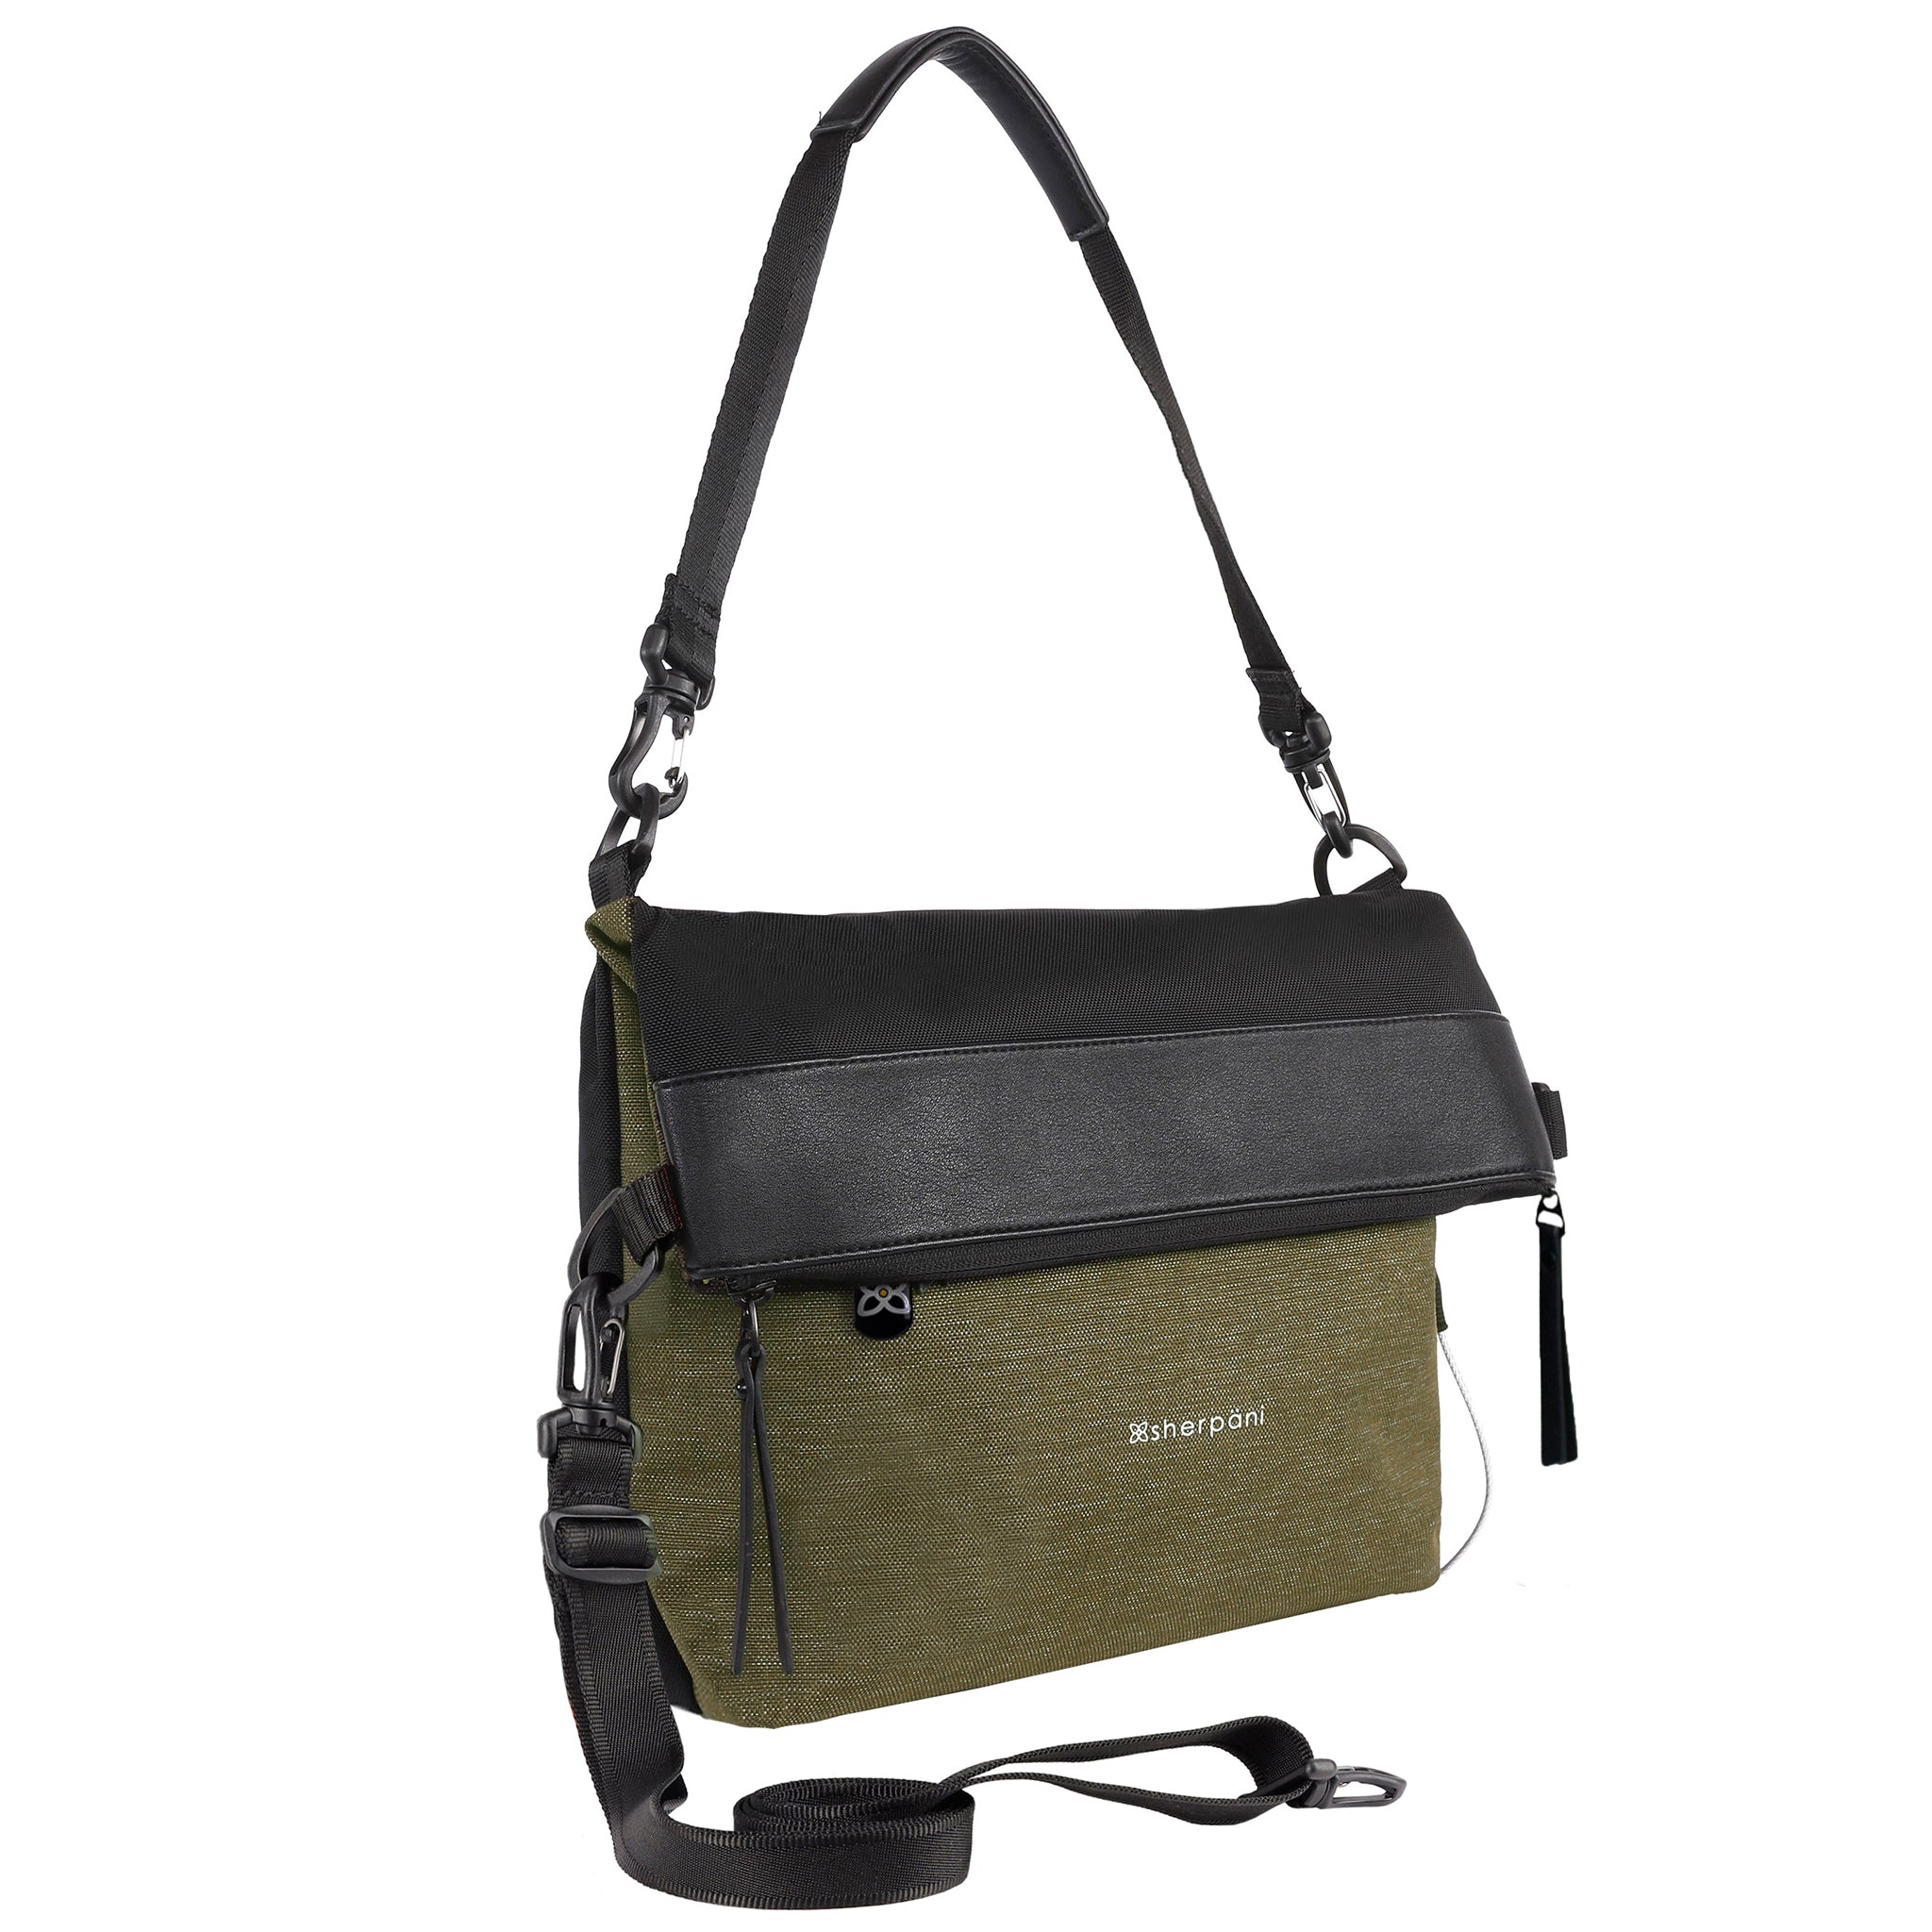 Angled front view of Sherpani&#39;s Anti-Theft bag, the Vale AT in Loden, with vegan leather accents in black. The top is folded over creating a signature overlap look. A chair loop lock is connected to a key fob clip on one side. It has an adjustable/detachable crossbody strap, and a second detachable strap fixed at a shorter length.